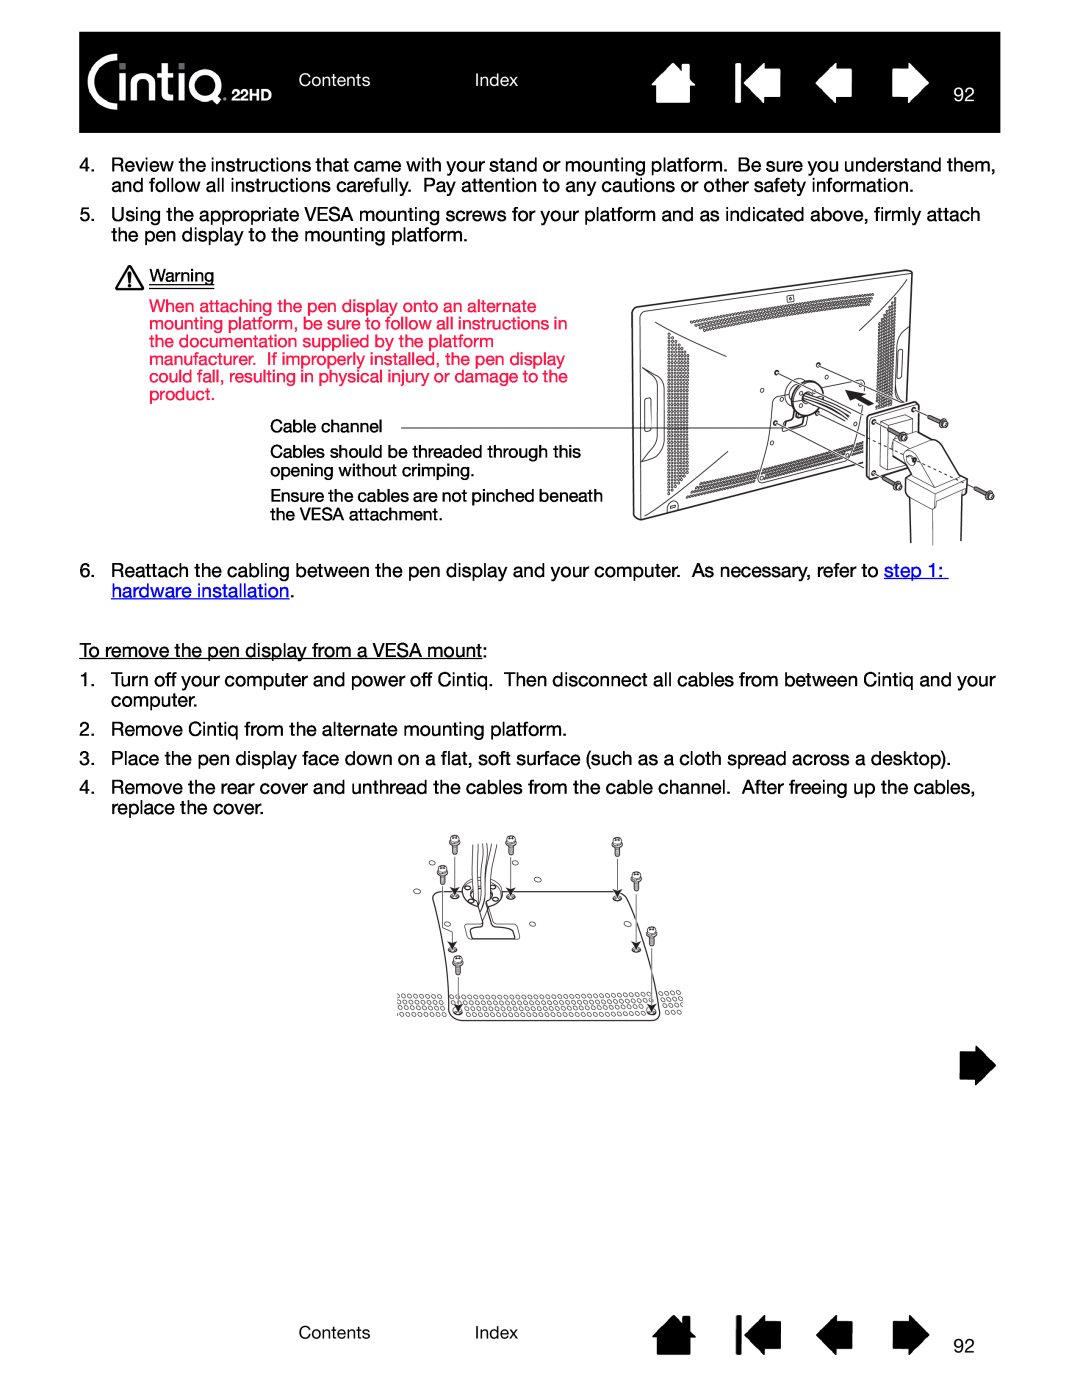 Wacom DTK-2200 user manual To remove the pen display from a VESA mount 